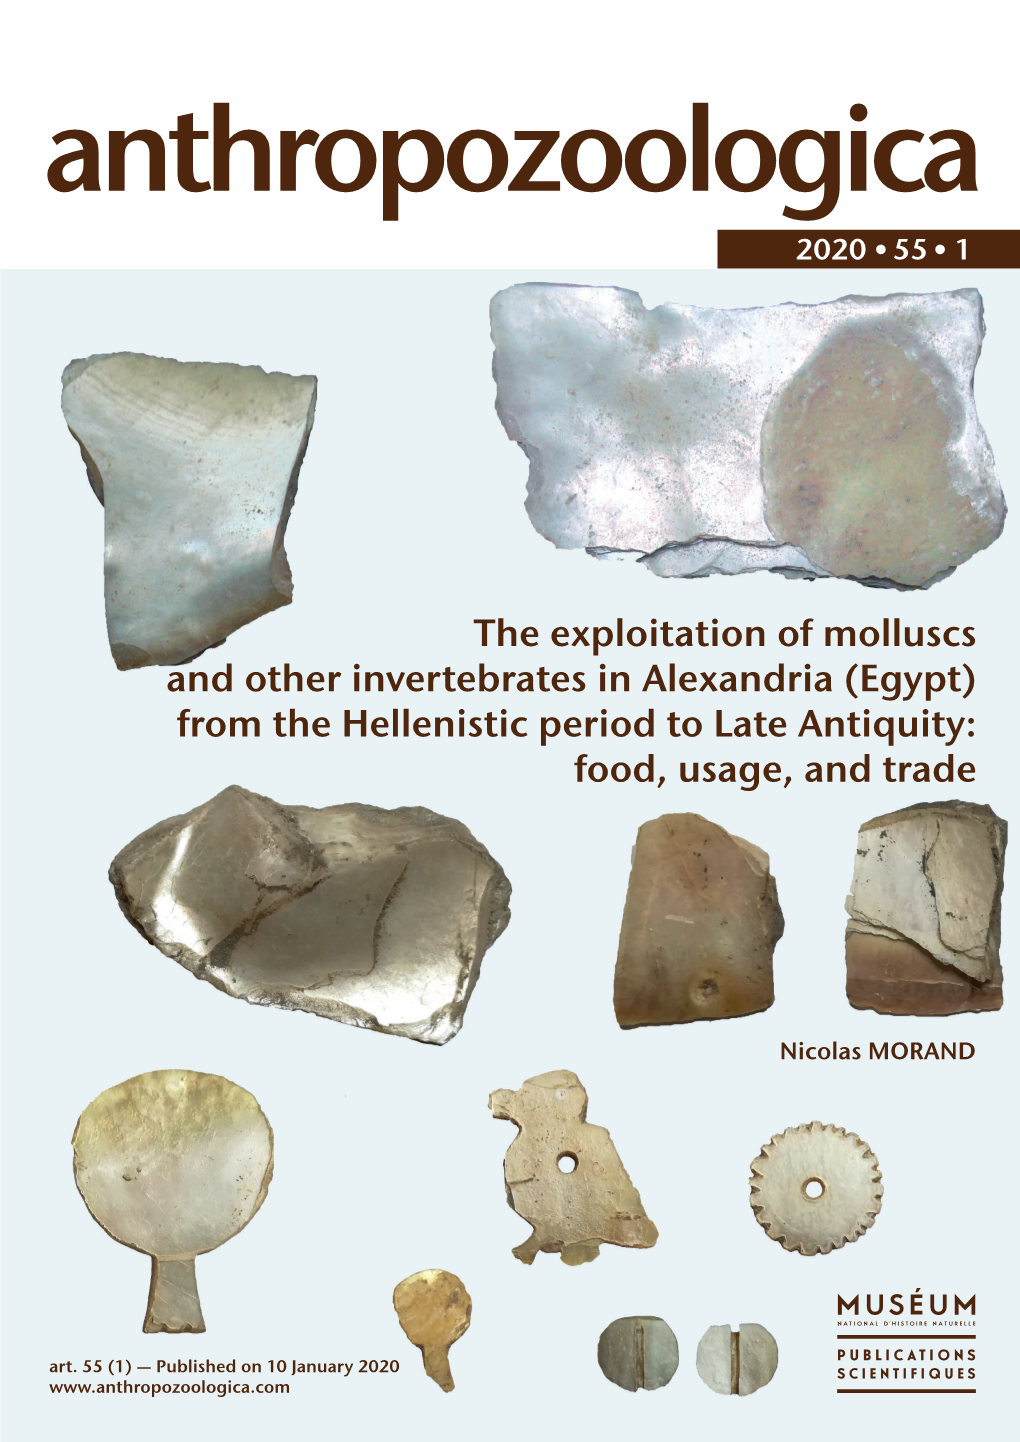 The Exploitation of Molluscs and Other Invertebrates in Alexandria (Egypt) from the Hellenistic Period to Late Antiquity: Food, Usage, and Trade